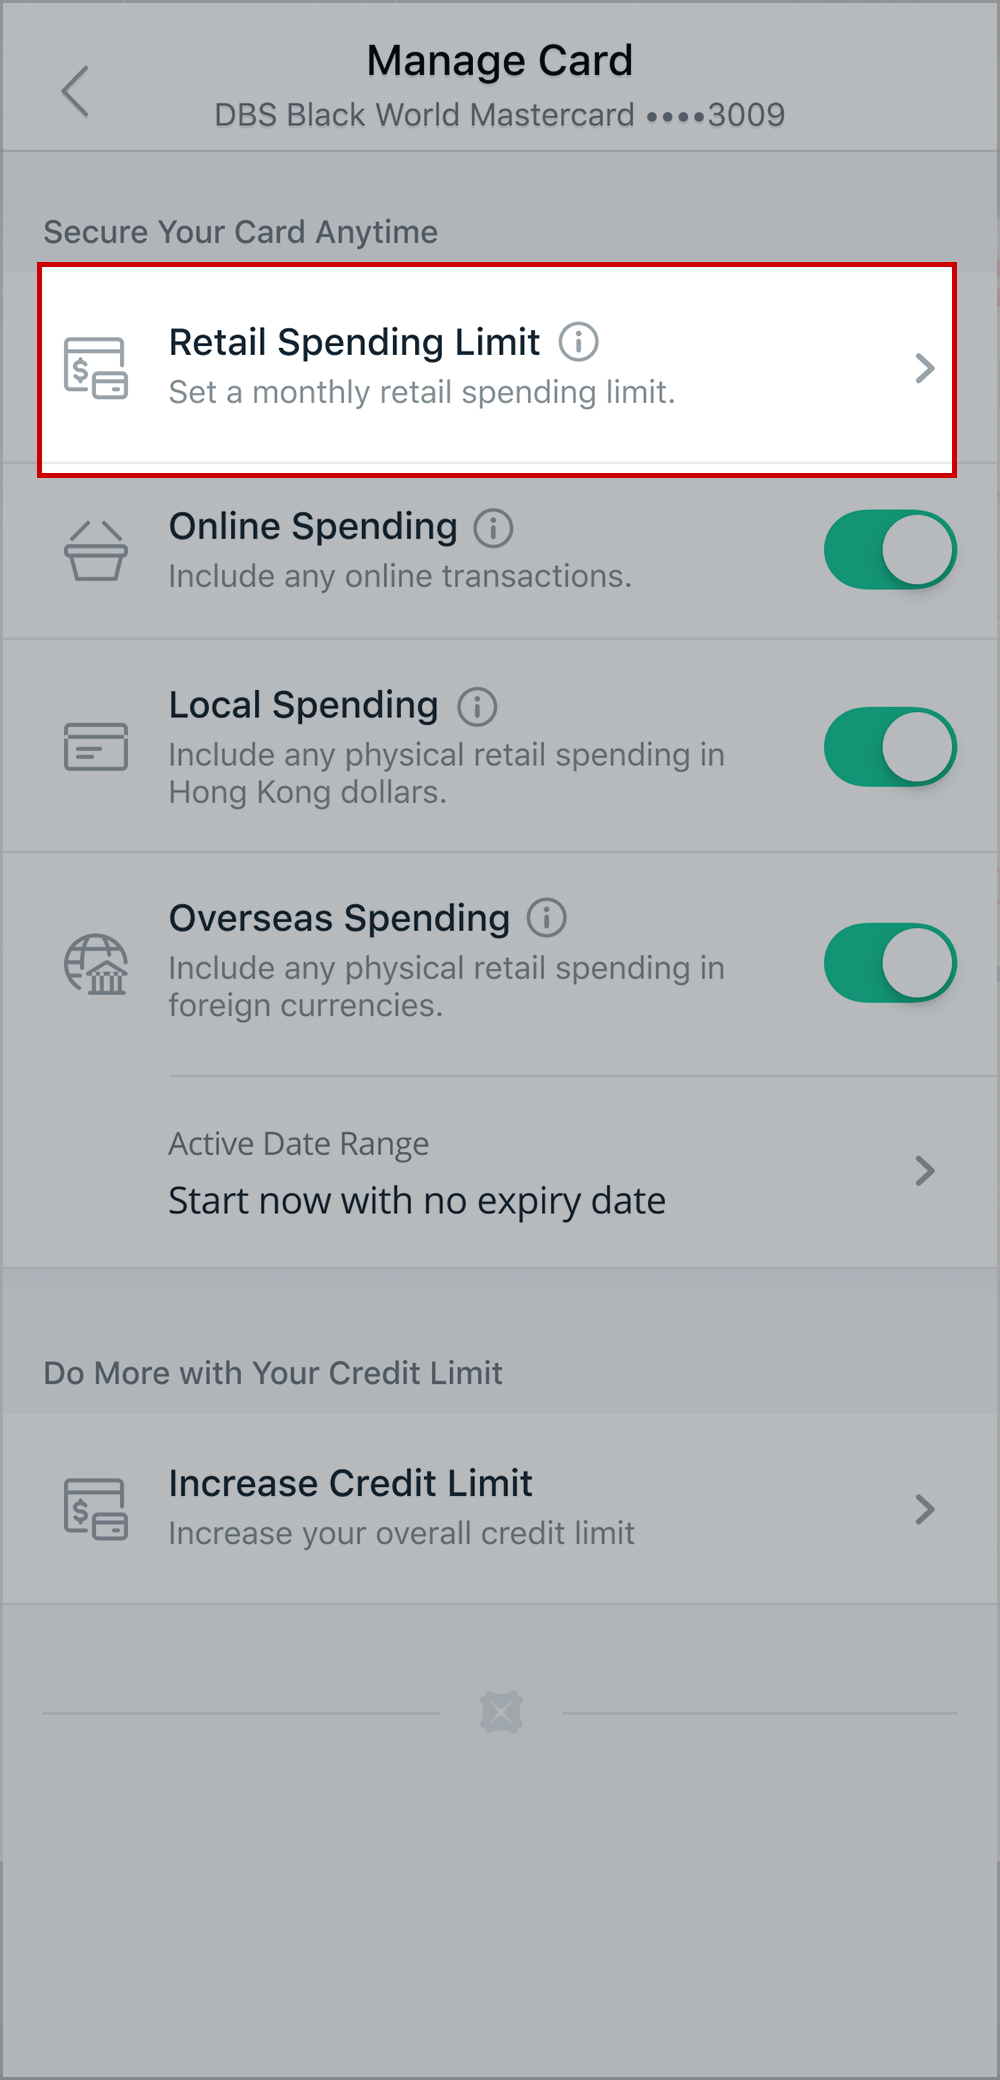 You can set your monthly retail spending amount